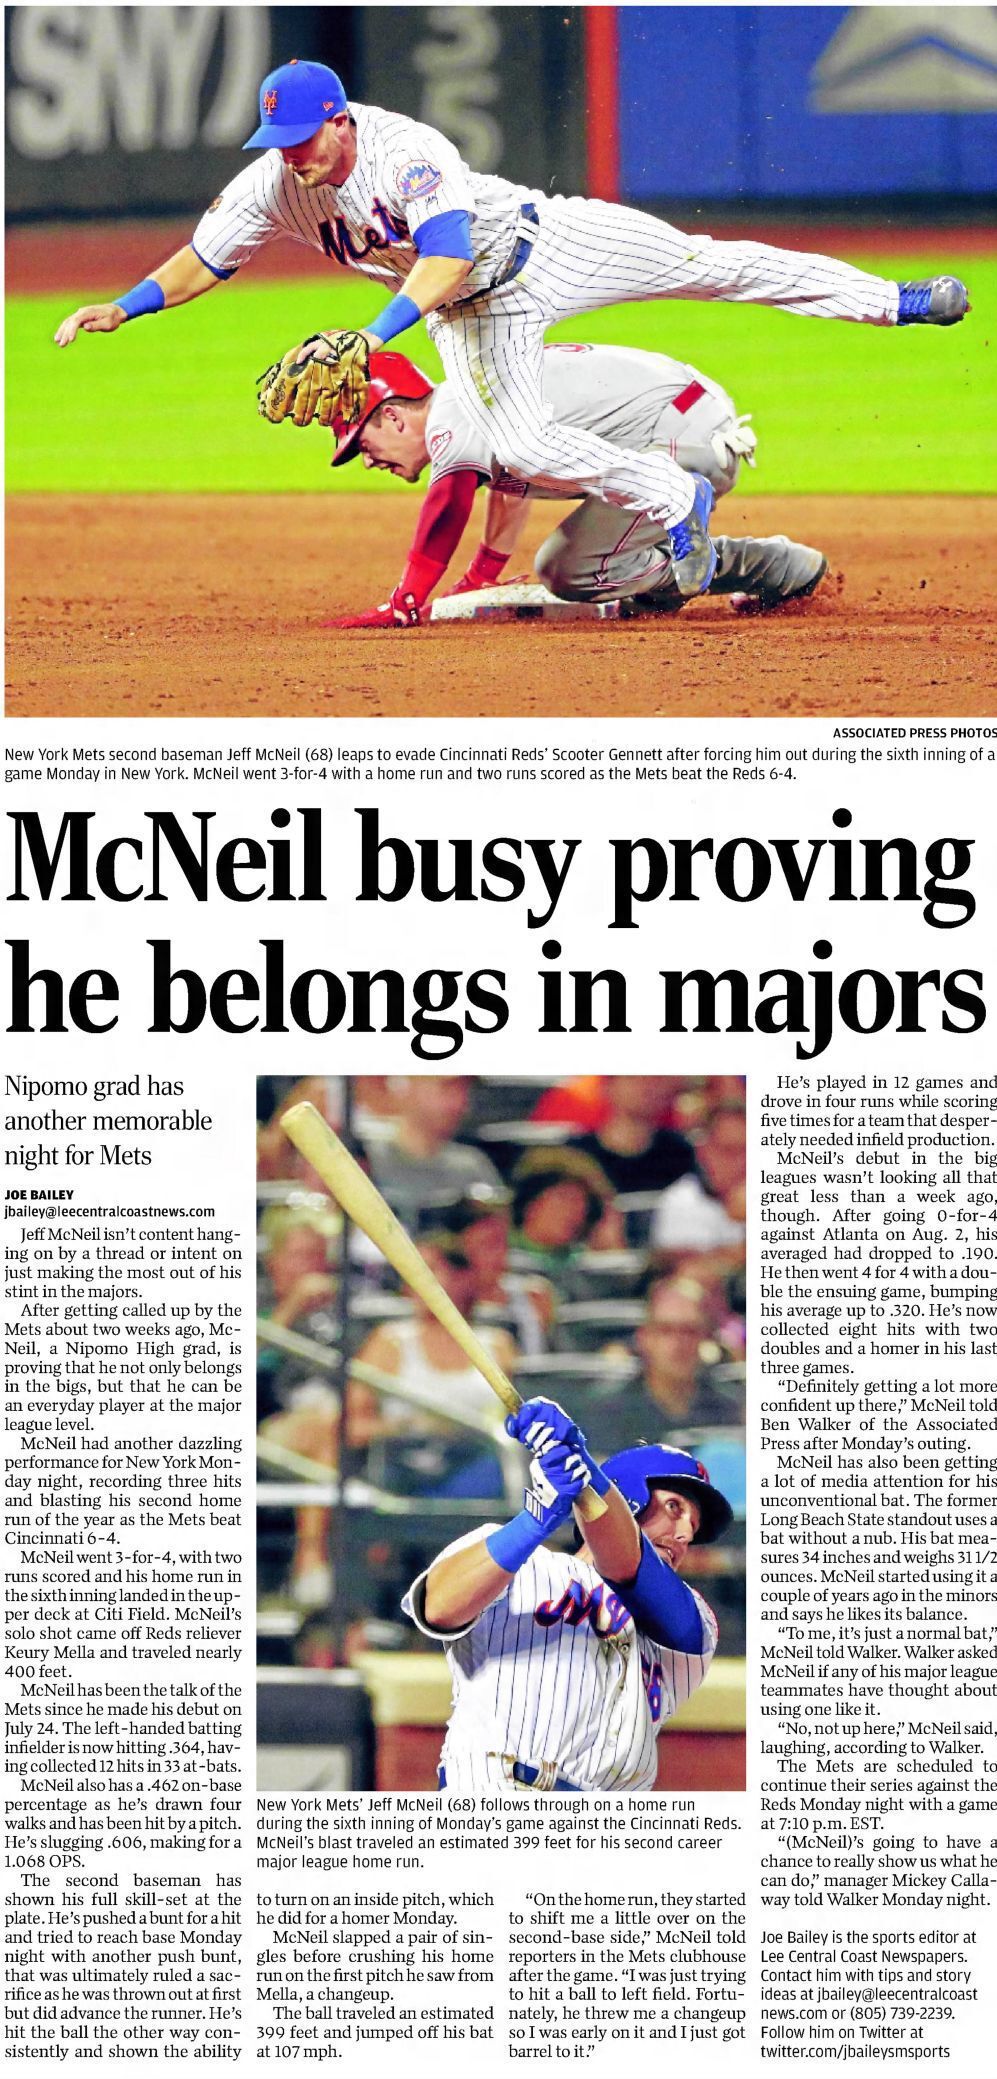 From the Vault: New York Met Jeff McNeil's days at Nipomo Highas a  golfer, Local Sports